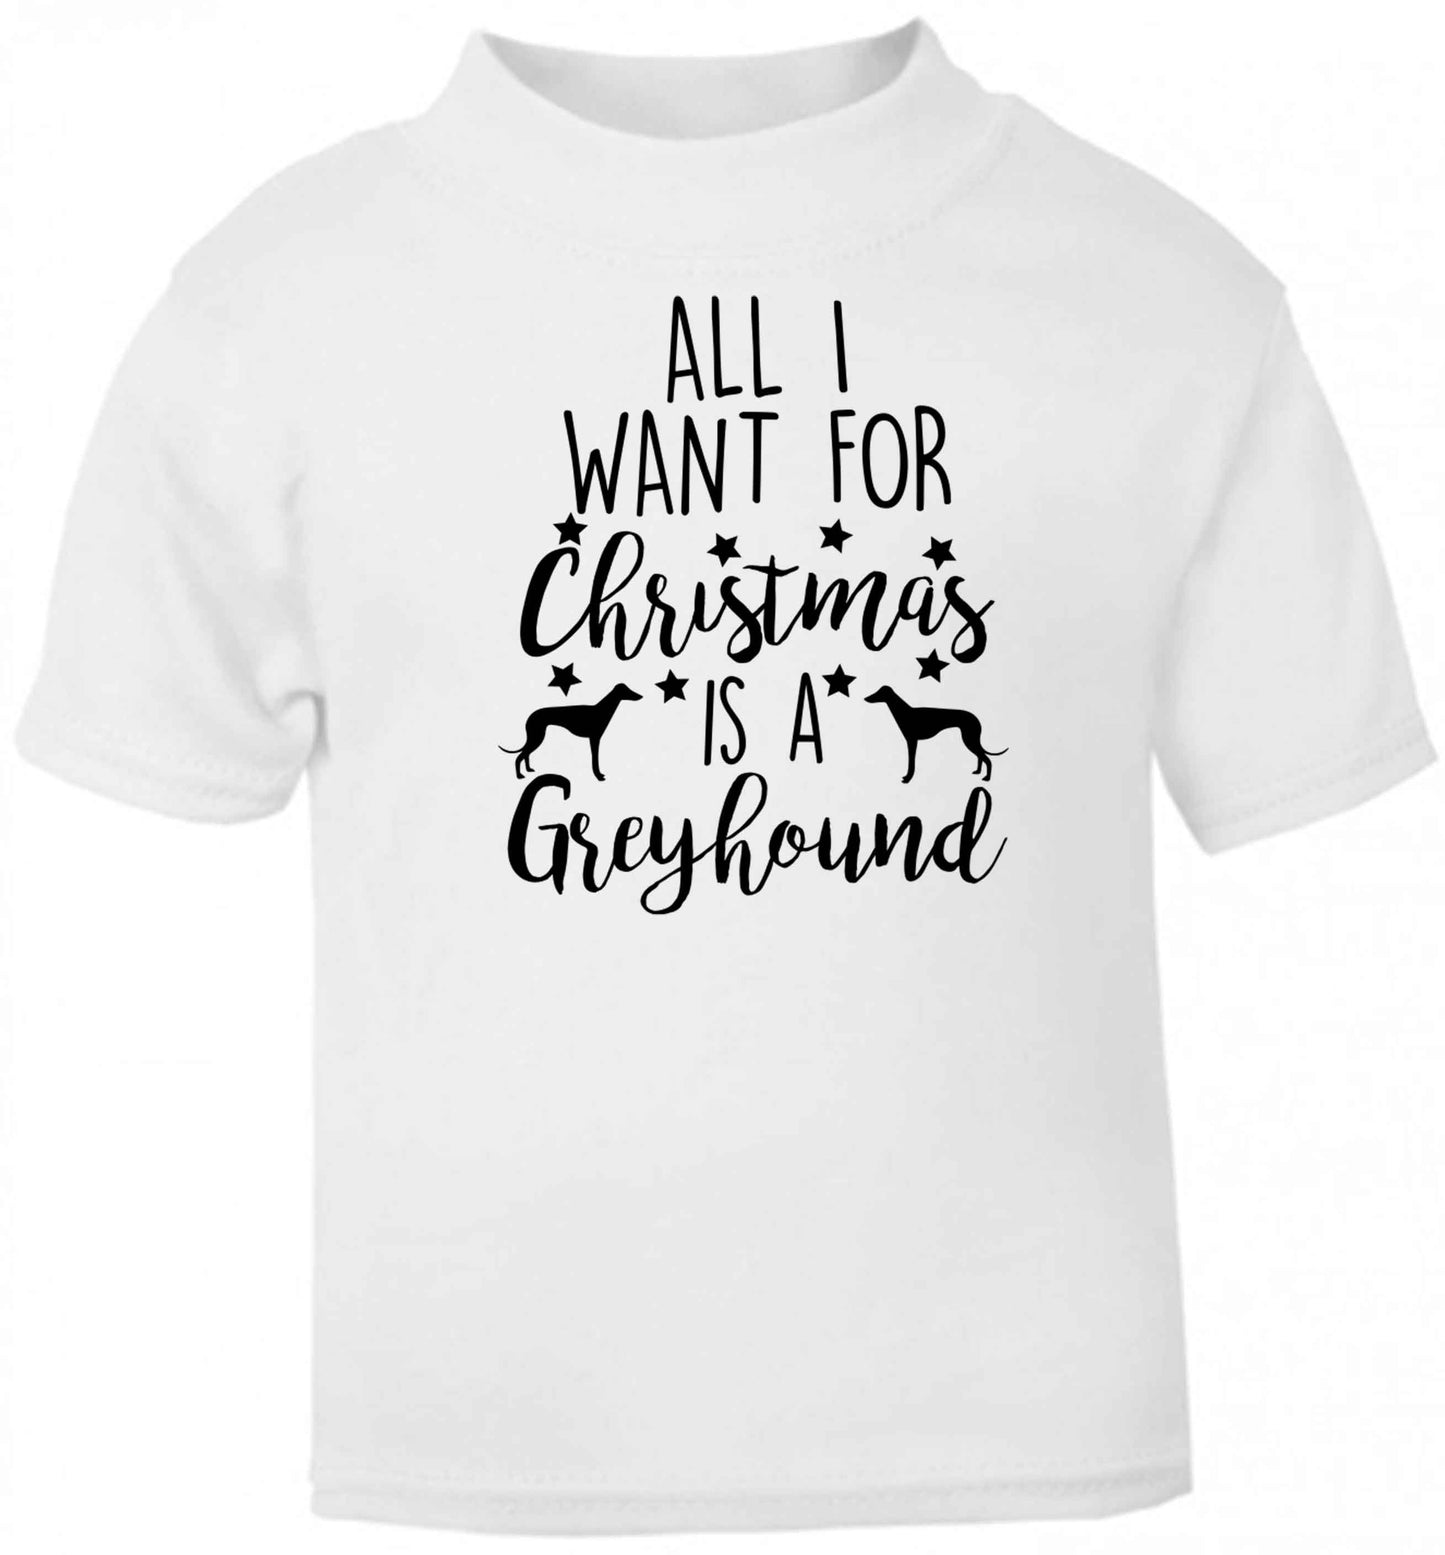 All I want for Christmas is a greyhound baby toddler Tshirt 2 Years